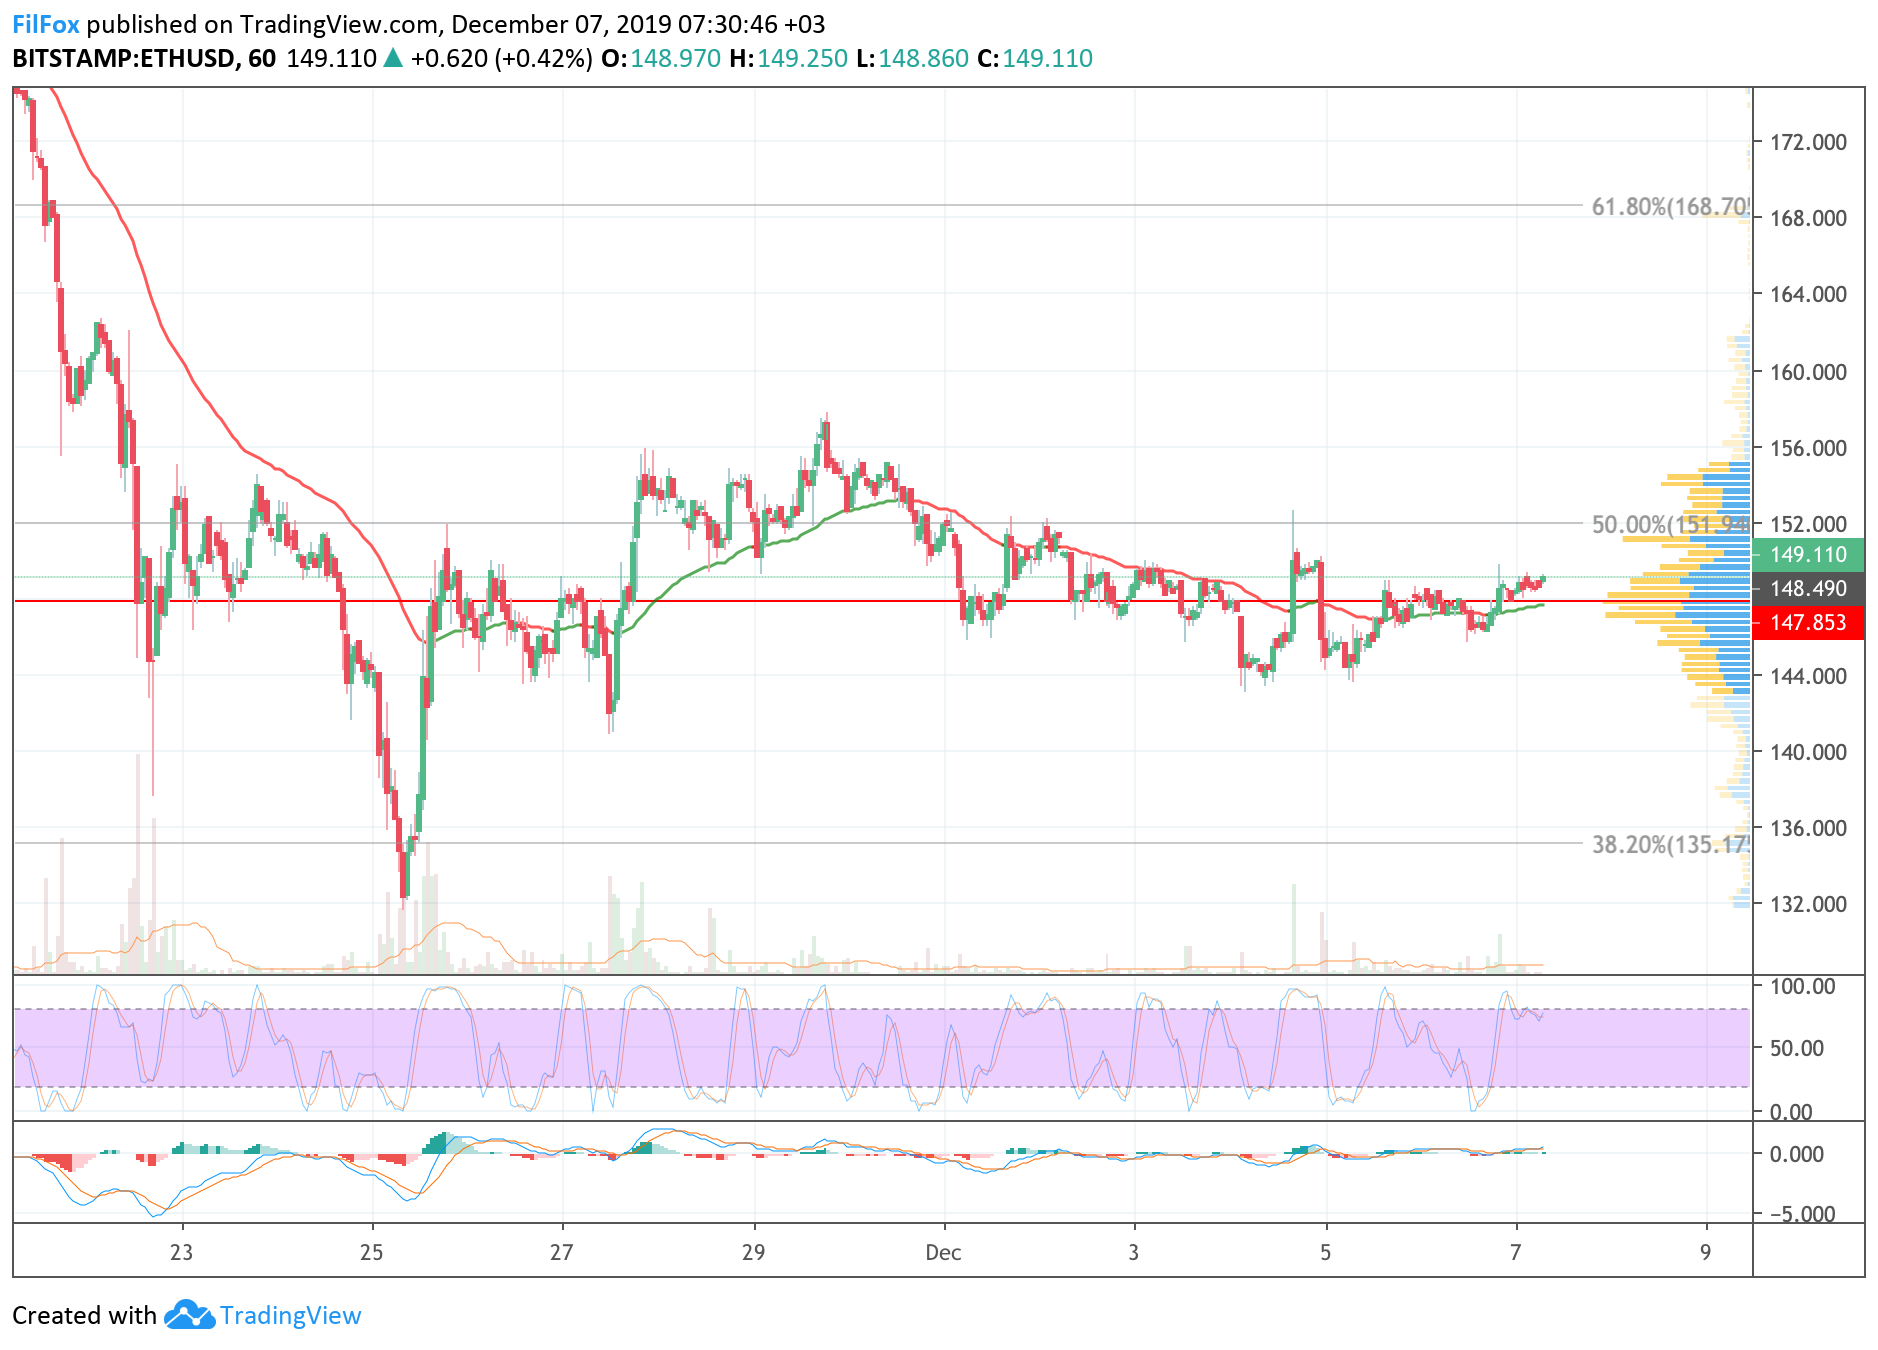 Analysis of cryptocurrency pairs BTC / USD, ETH / USD and XRP / USD on 12/07/2019